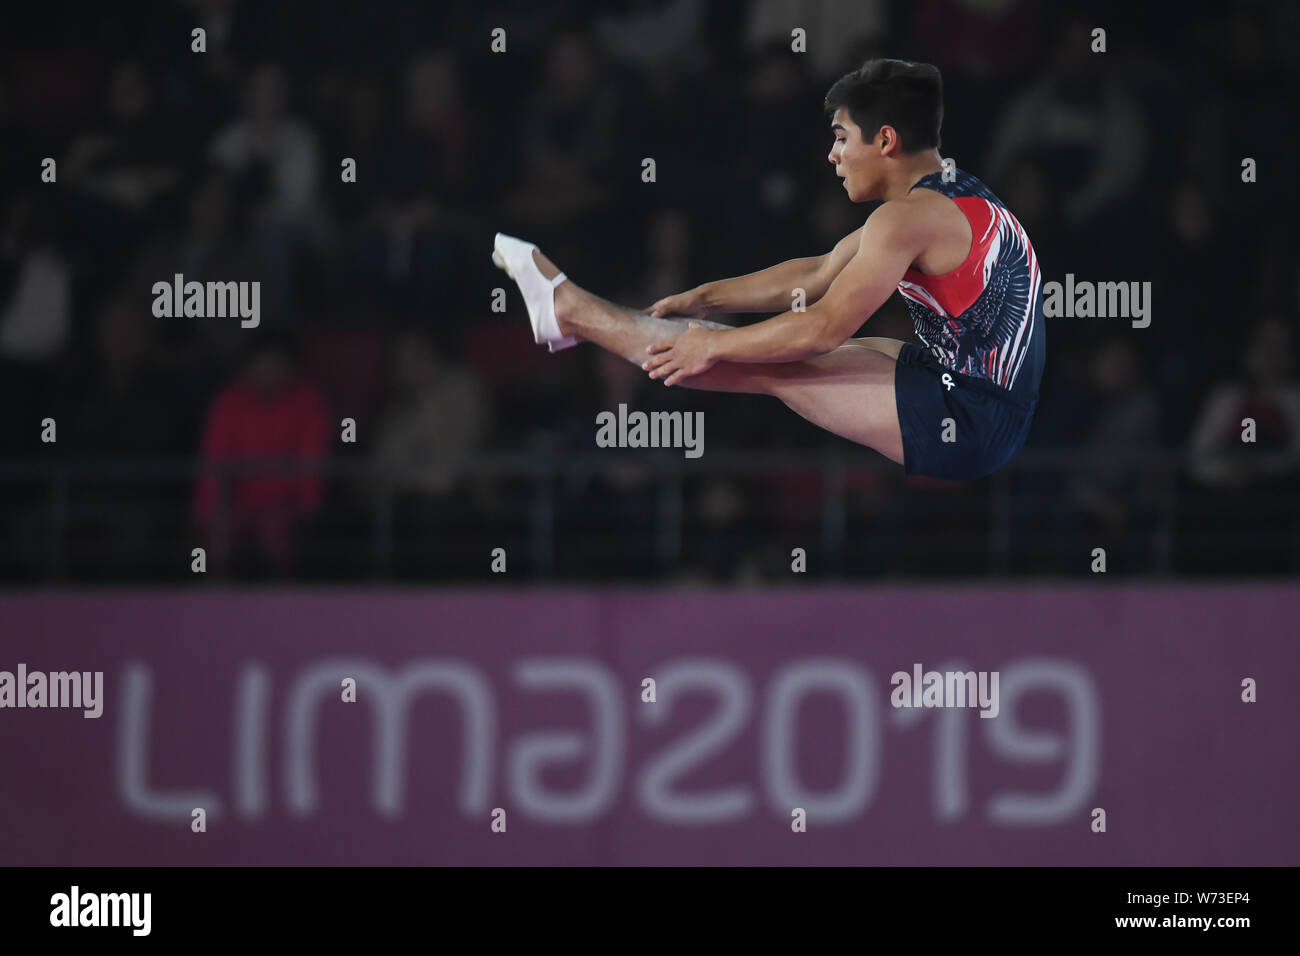 Lima, Peru. 4th Aug, 2019. RUBEN PADILLA from the US flips in a pike position during the competition held in the Polideportivo Villa El Salvador in Lima, Peru. Credit: Amy Sanderson/ZUMA Wire/Alamy Live News Stock Photo